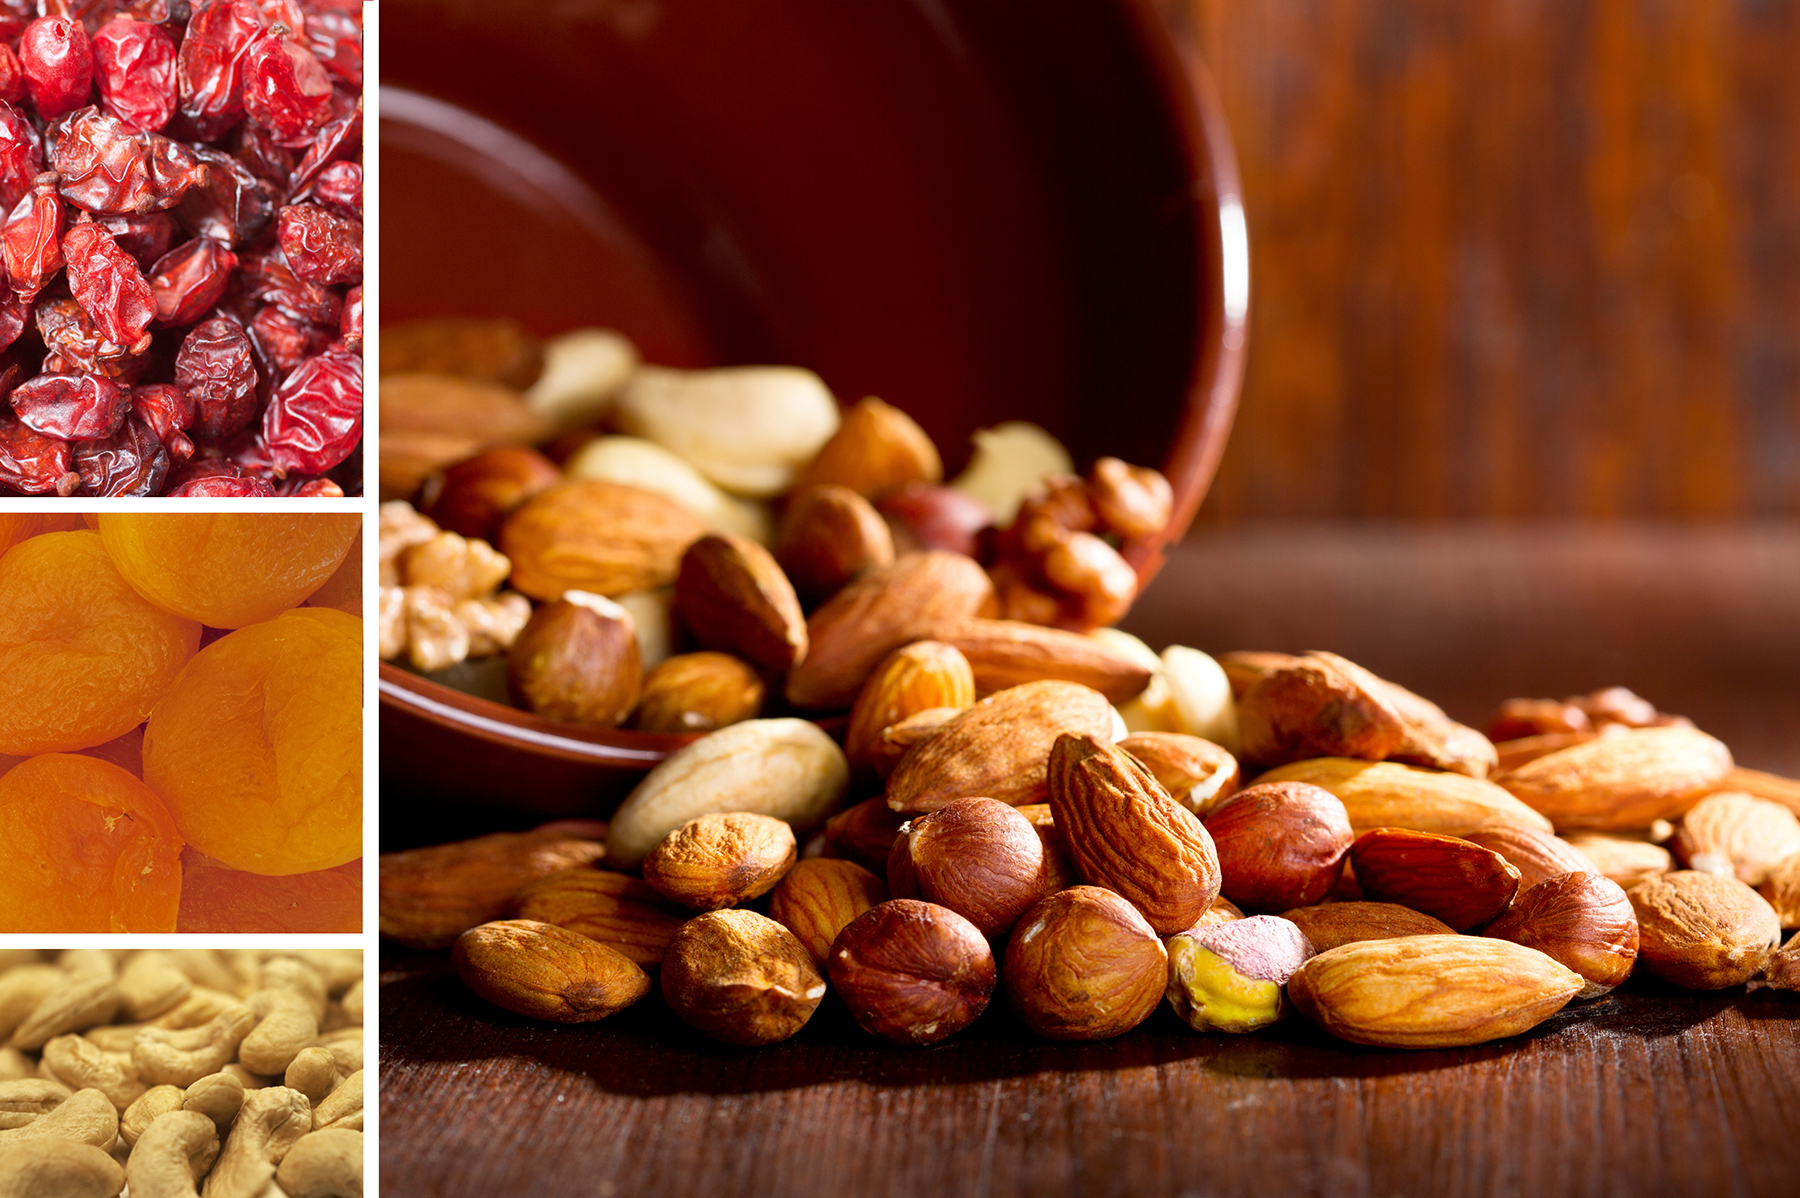 All kinds of Iranian nuts and dried fruits - Wholesale & Export of Nuts and Dried Fruits From Iran _ Nutex Company